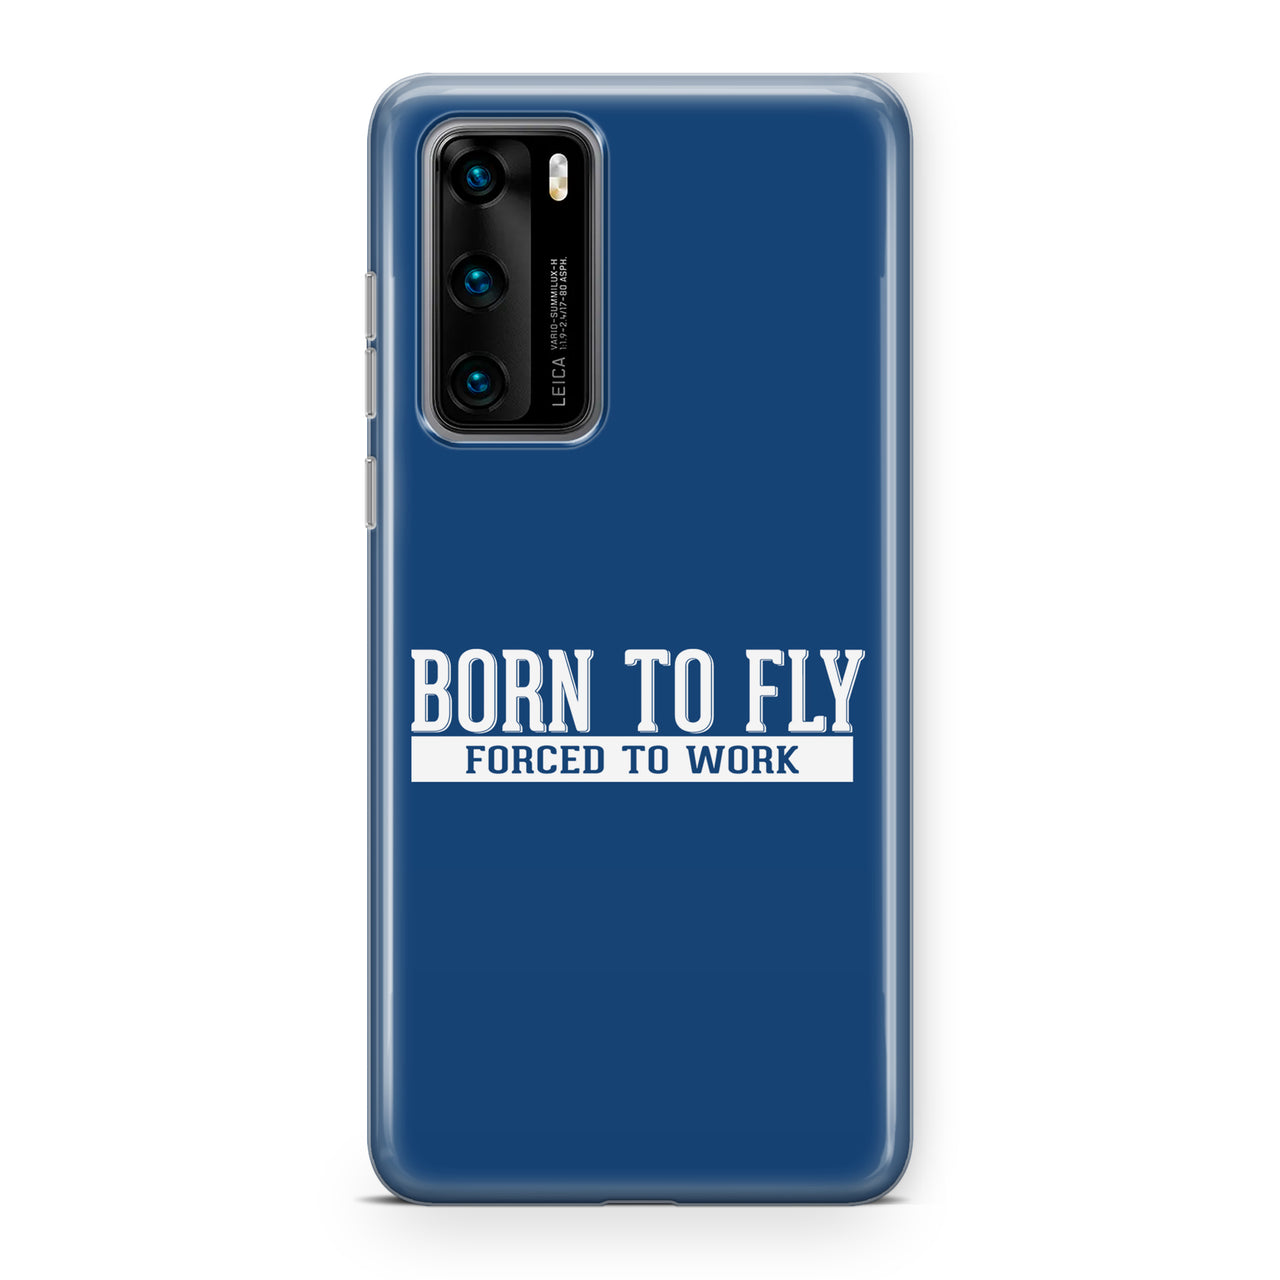 Born To Fly Forced To Work Designed Huawei Cases